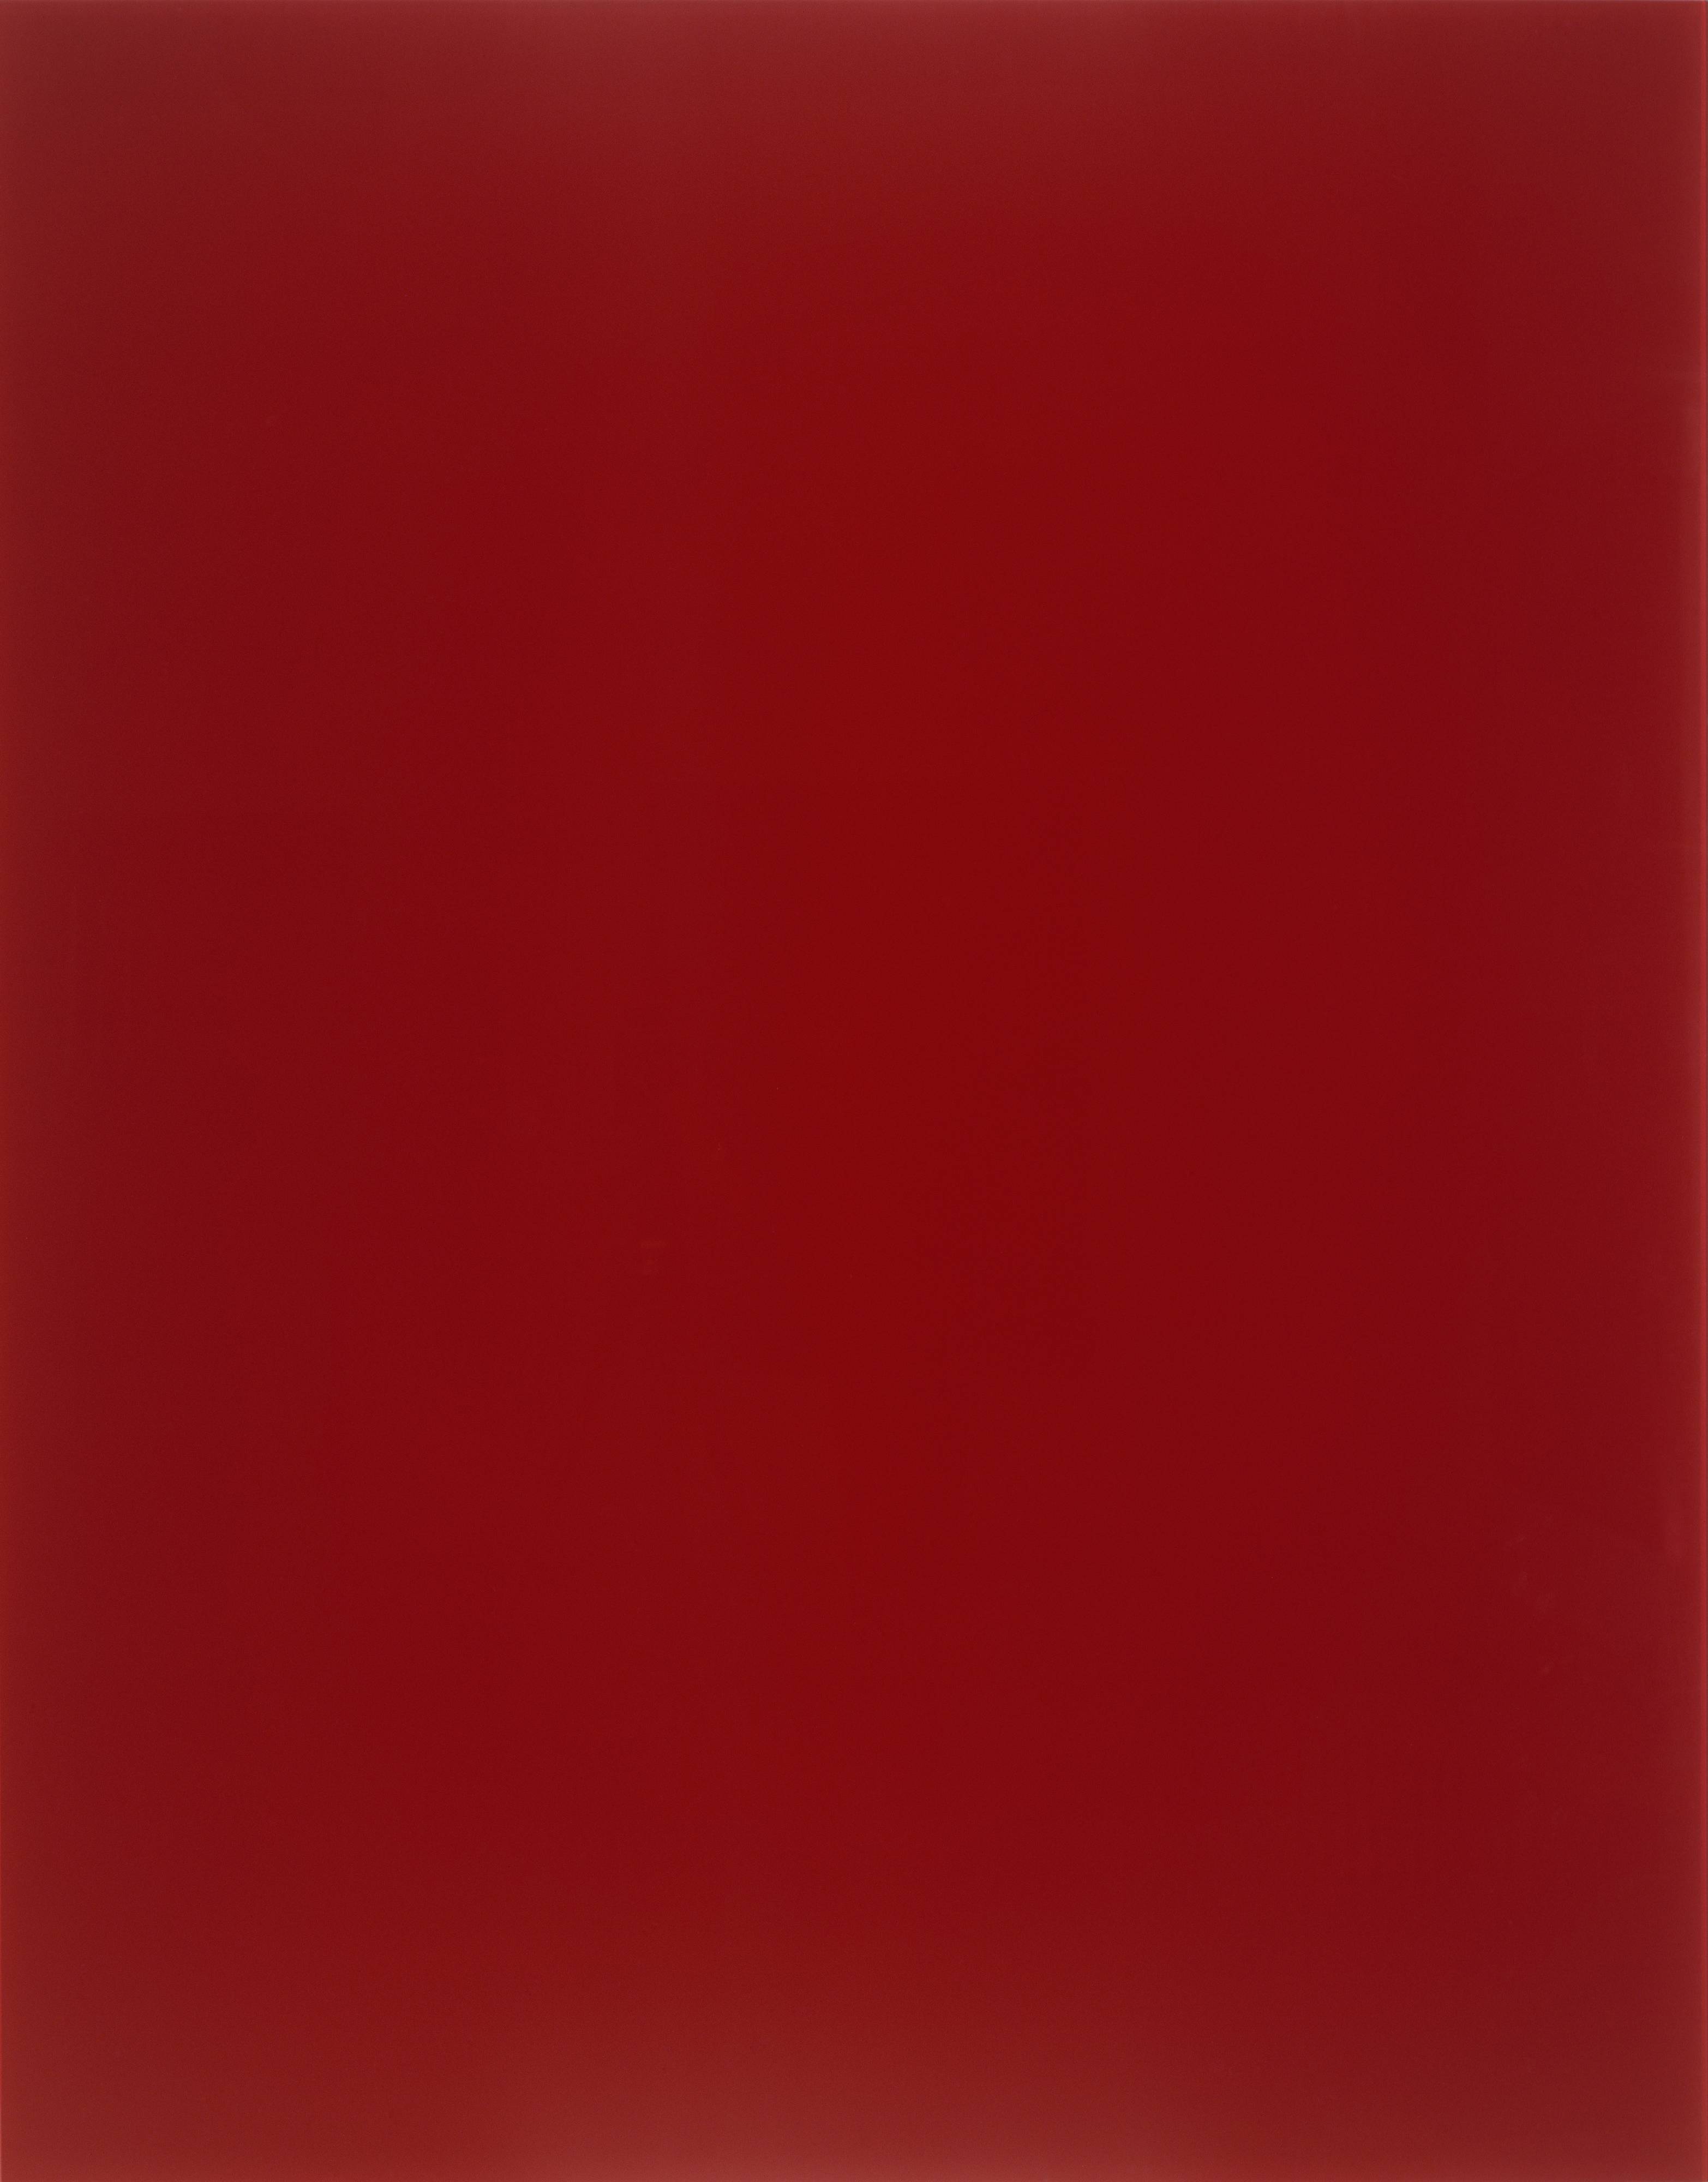 A painting that is completely blood red in color.